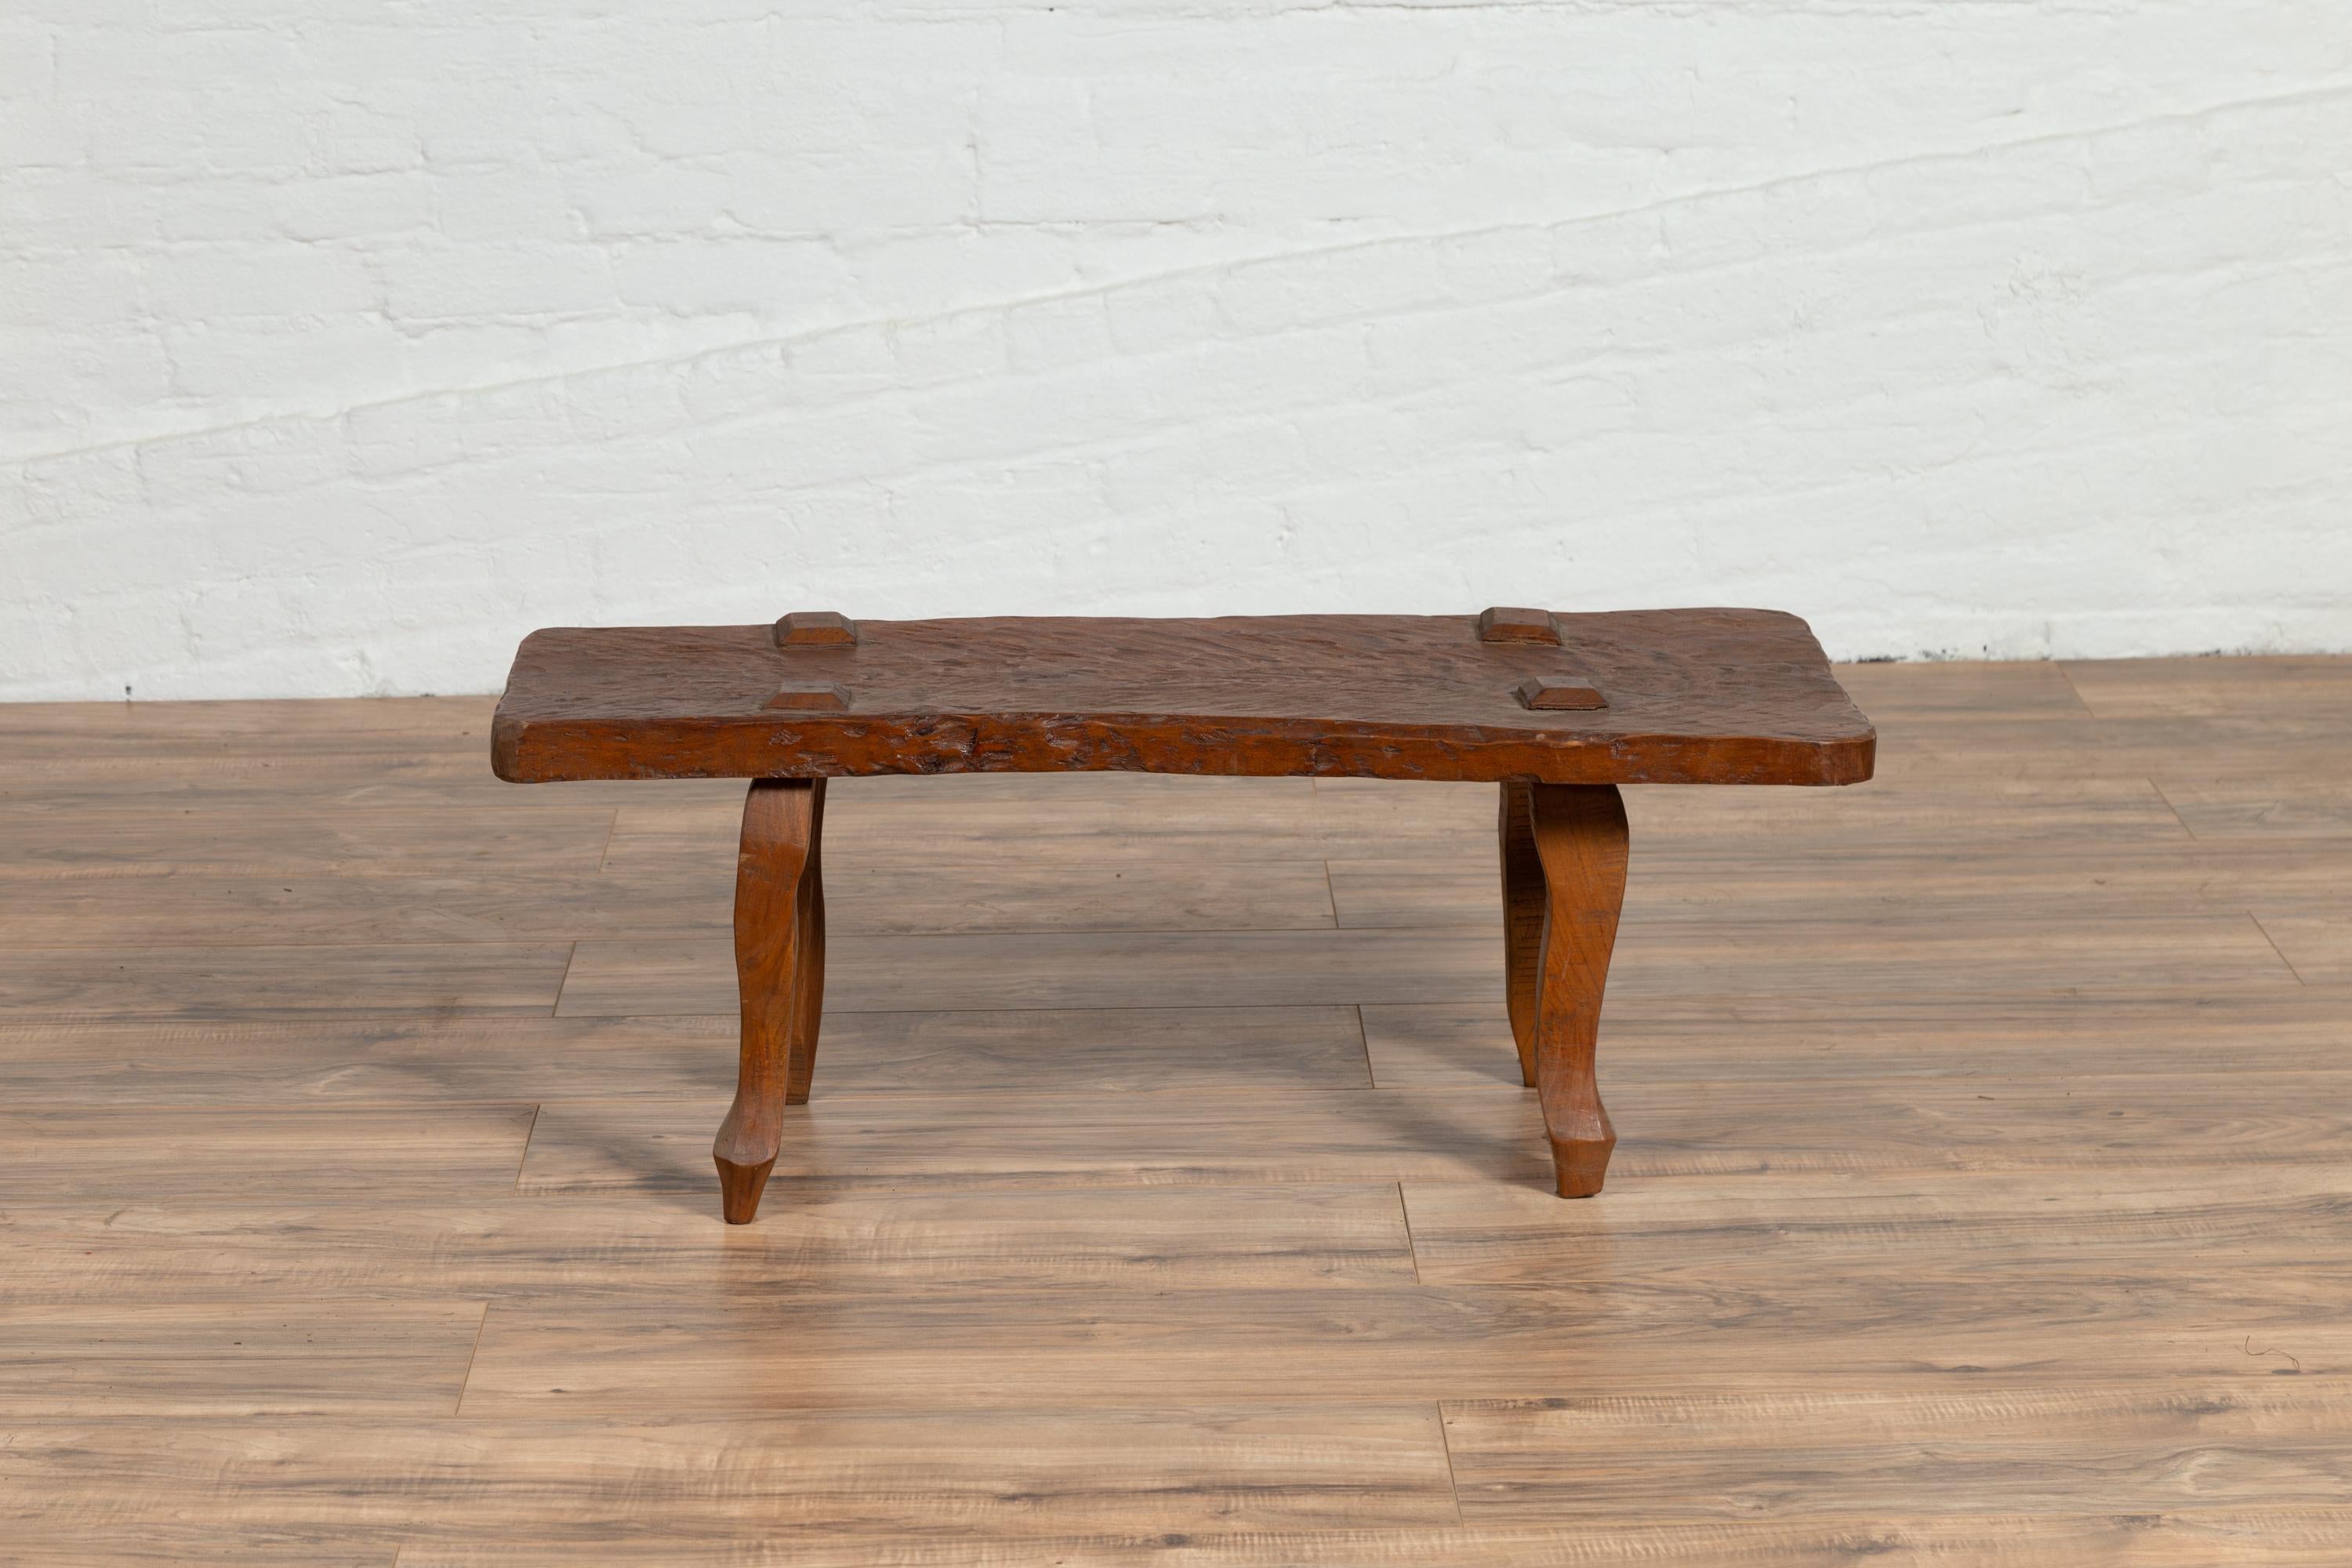 A Javanese freeform low bench made of antique reclaimed teak wood with textured appearance. Born on the island of Java in the early years of the 20th century, this rustic bench features a nicely textured top with protruding raised joints, sitting